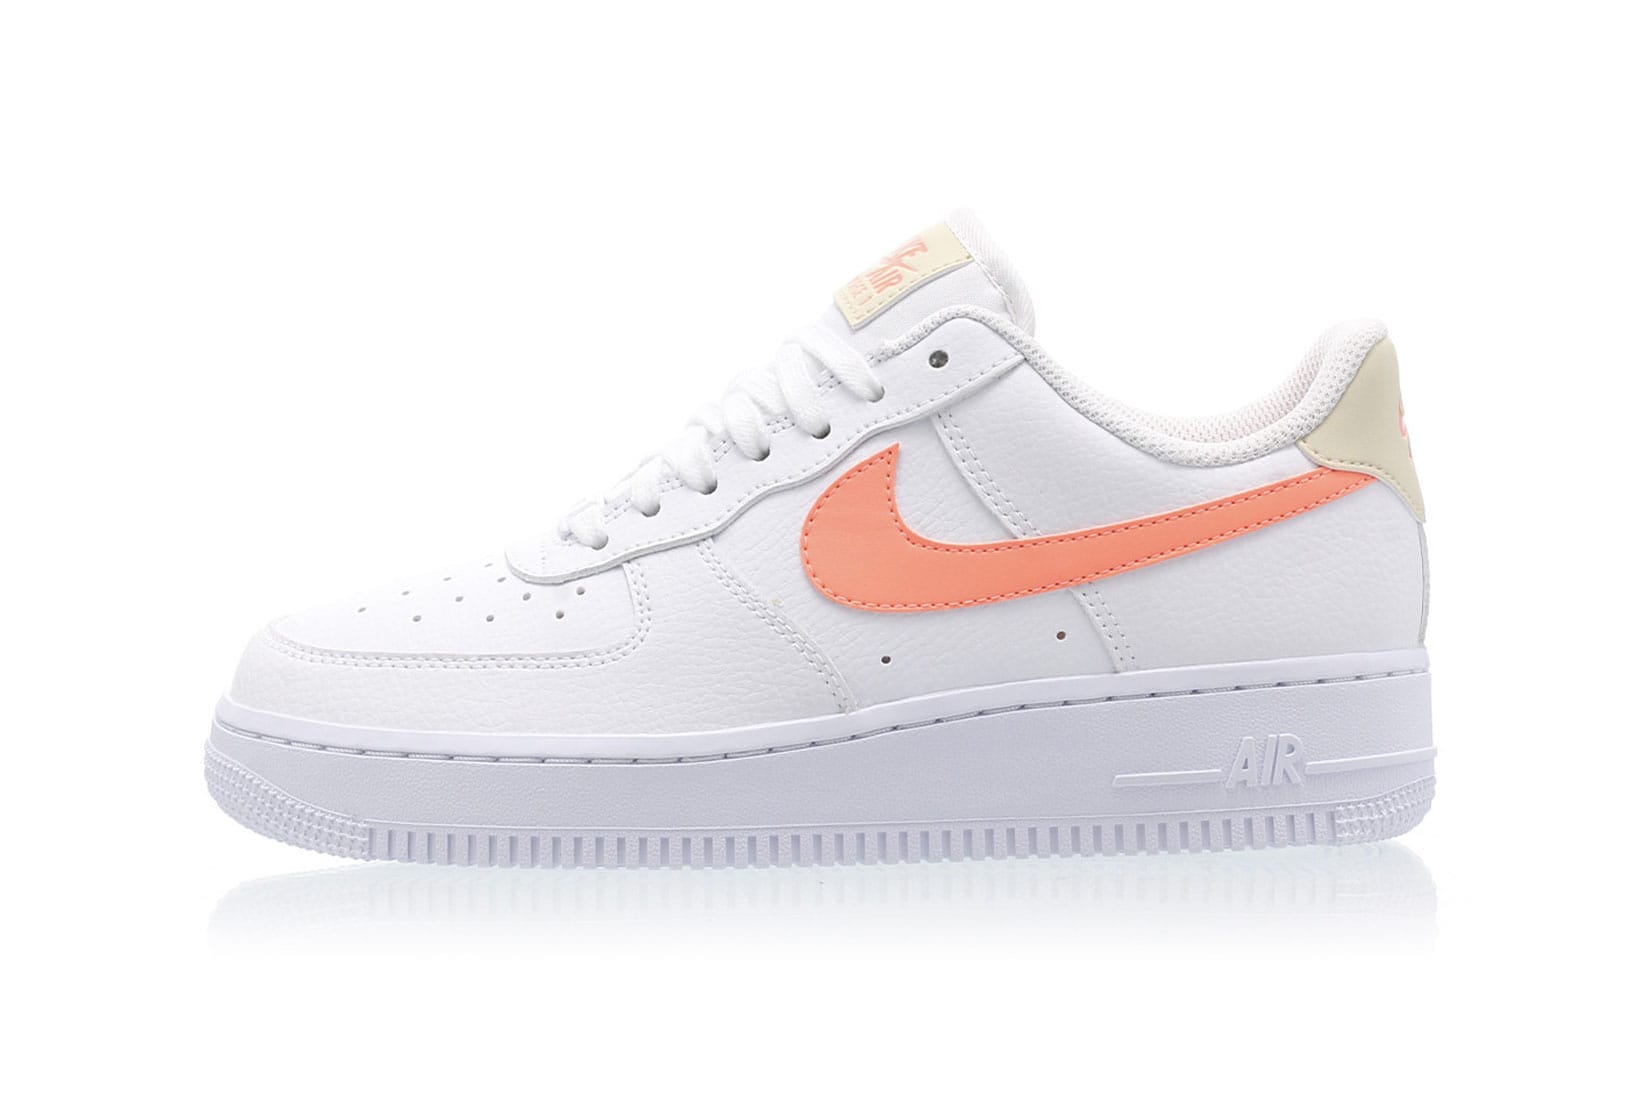 orange and pink air force 1